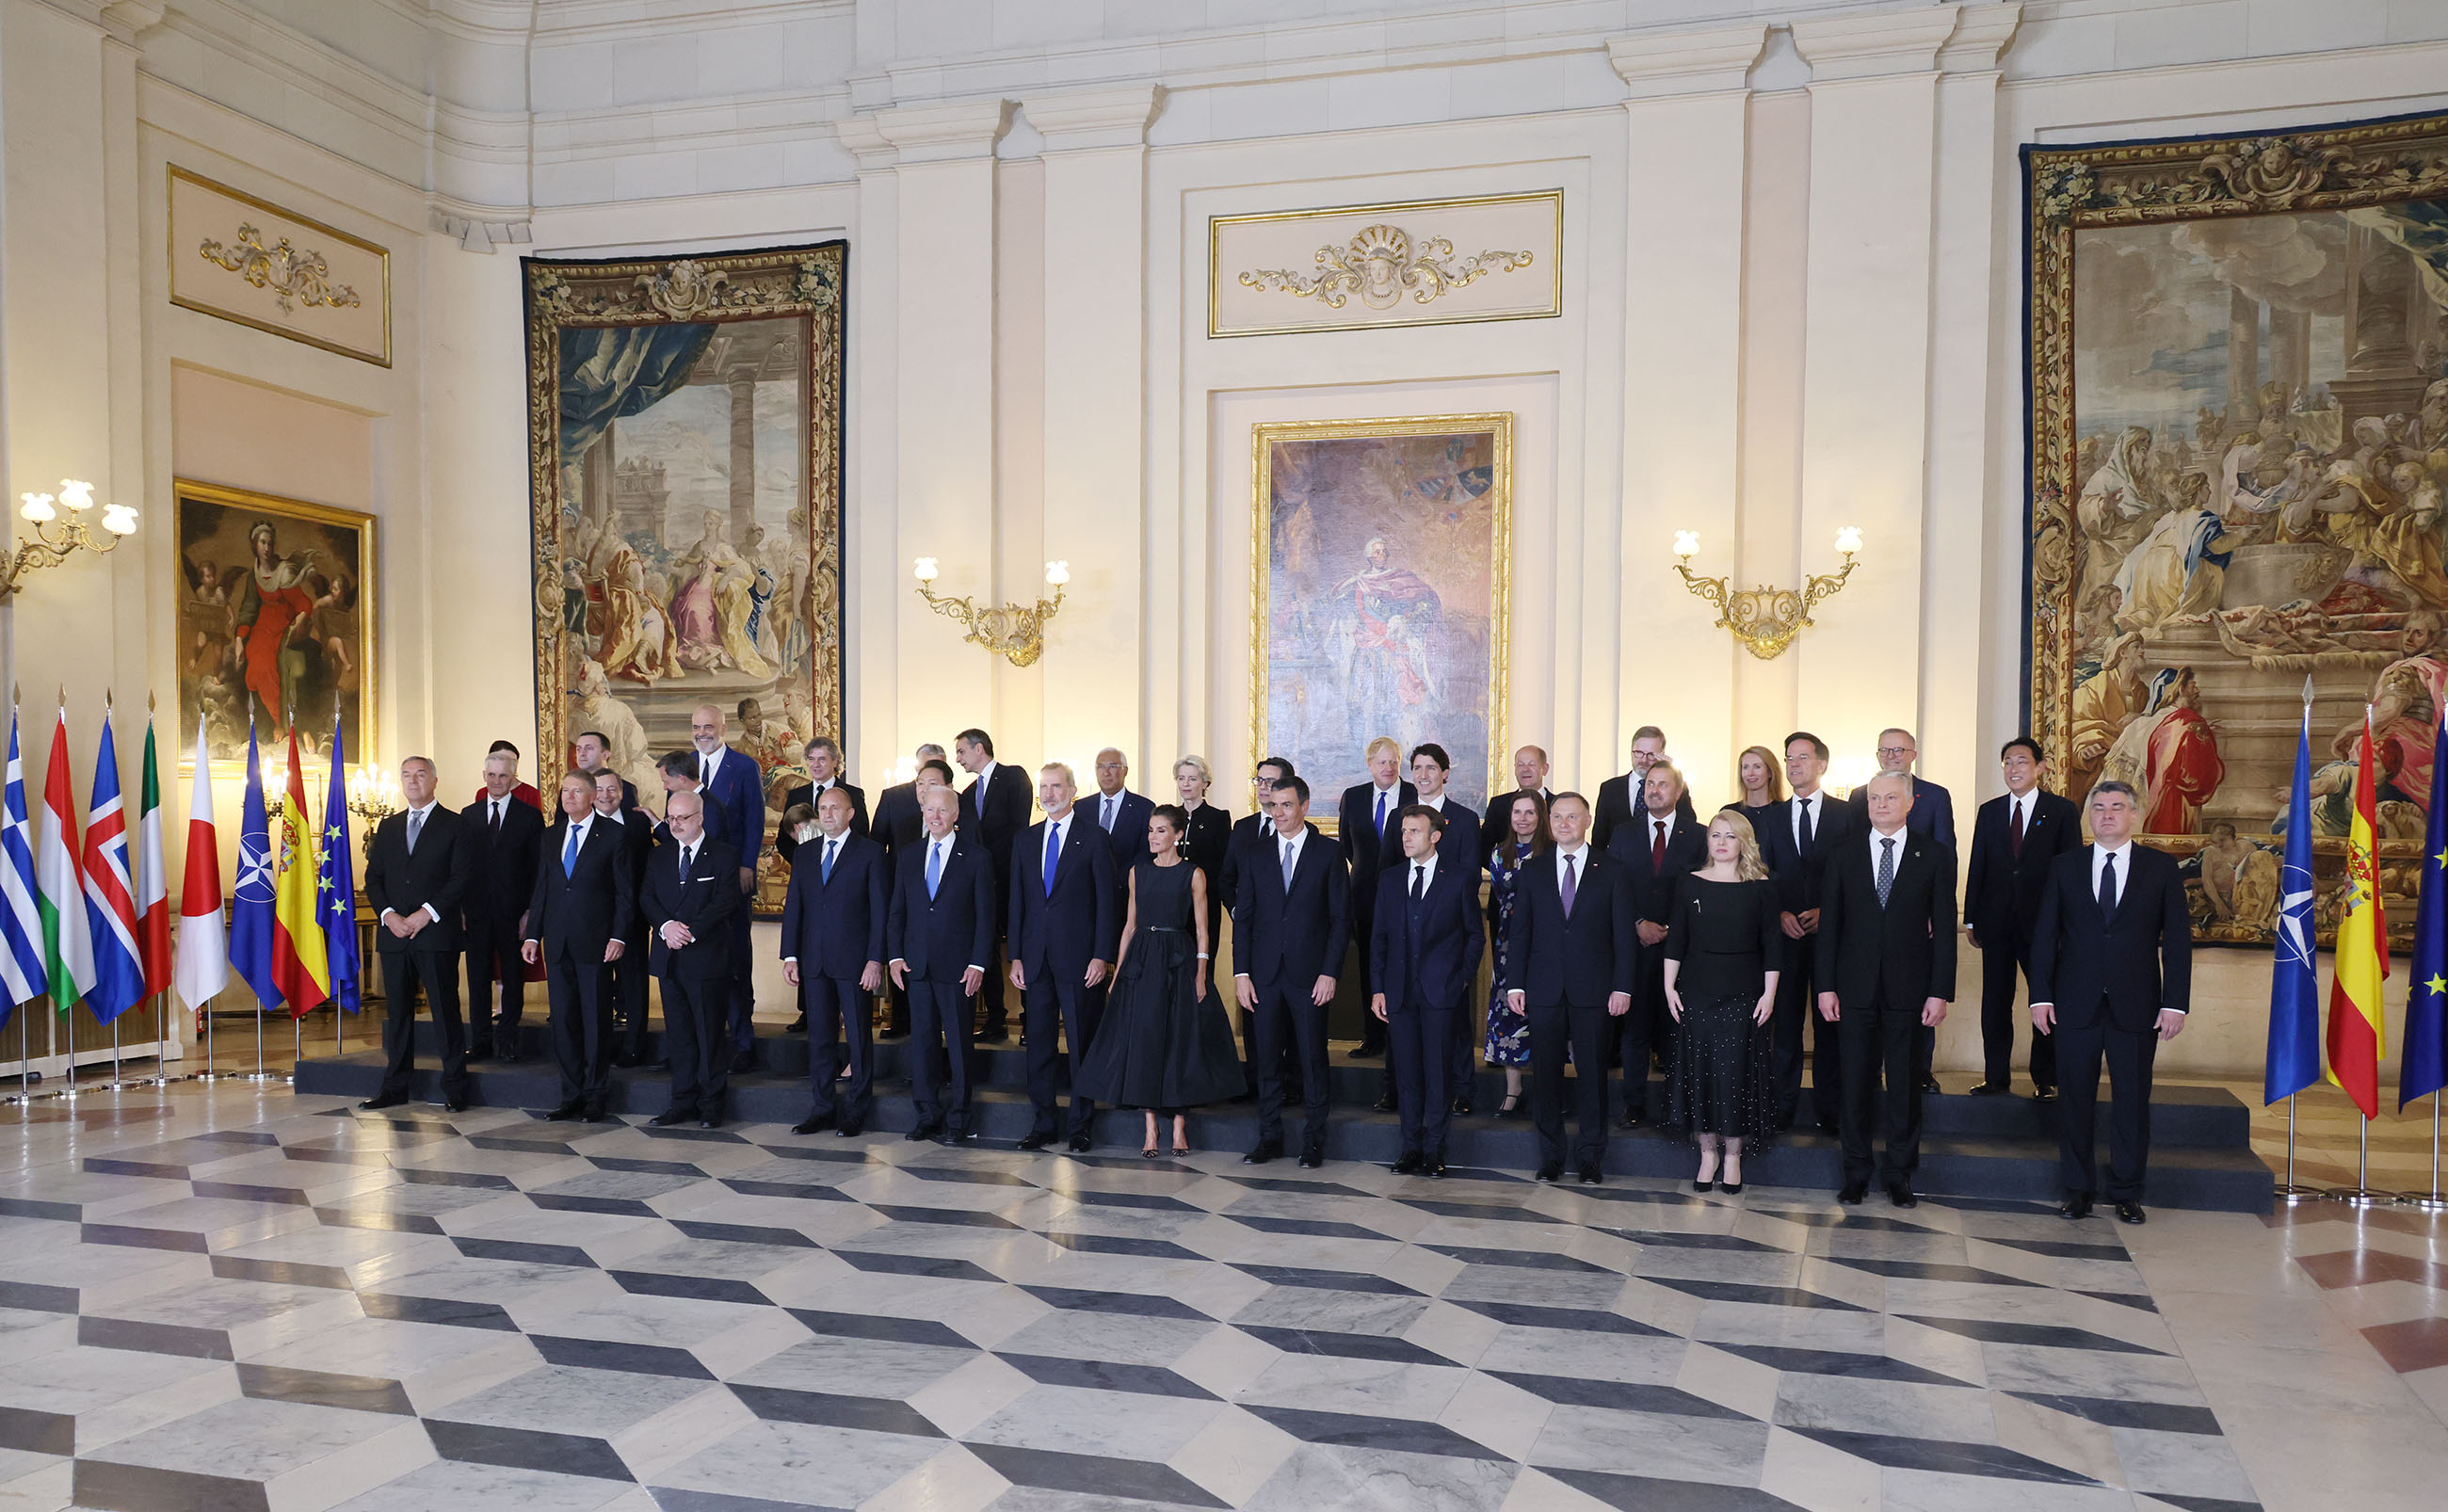 Photograph of a photo session in a dinner hosted by H.M. King Felipe VI (2)